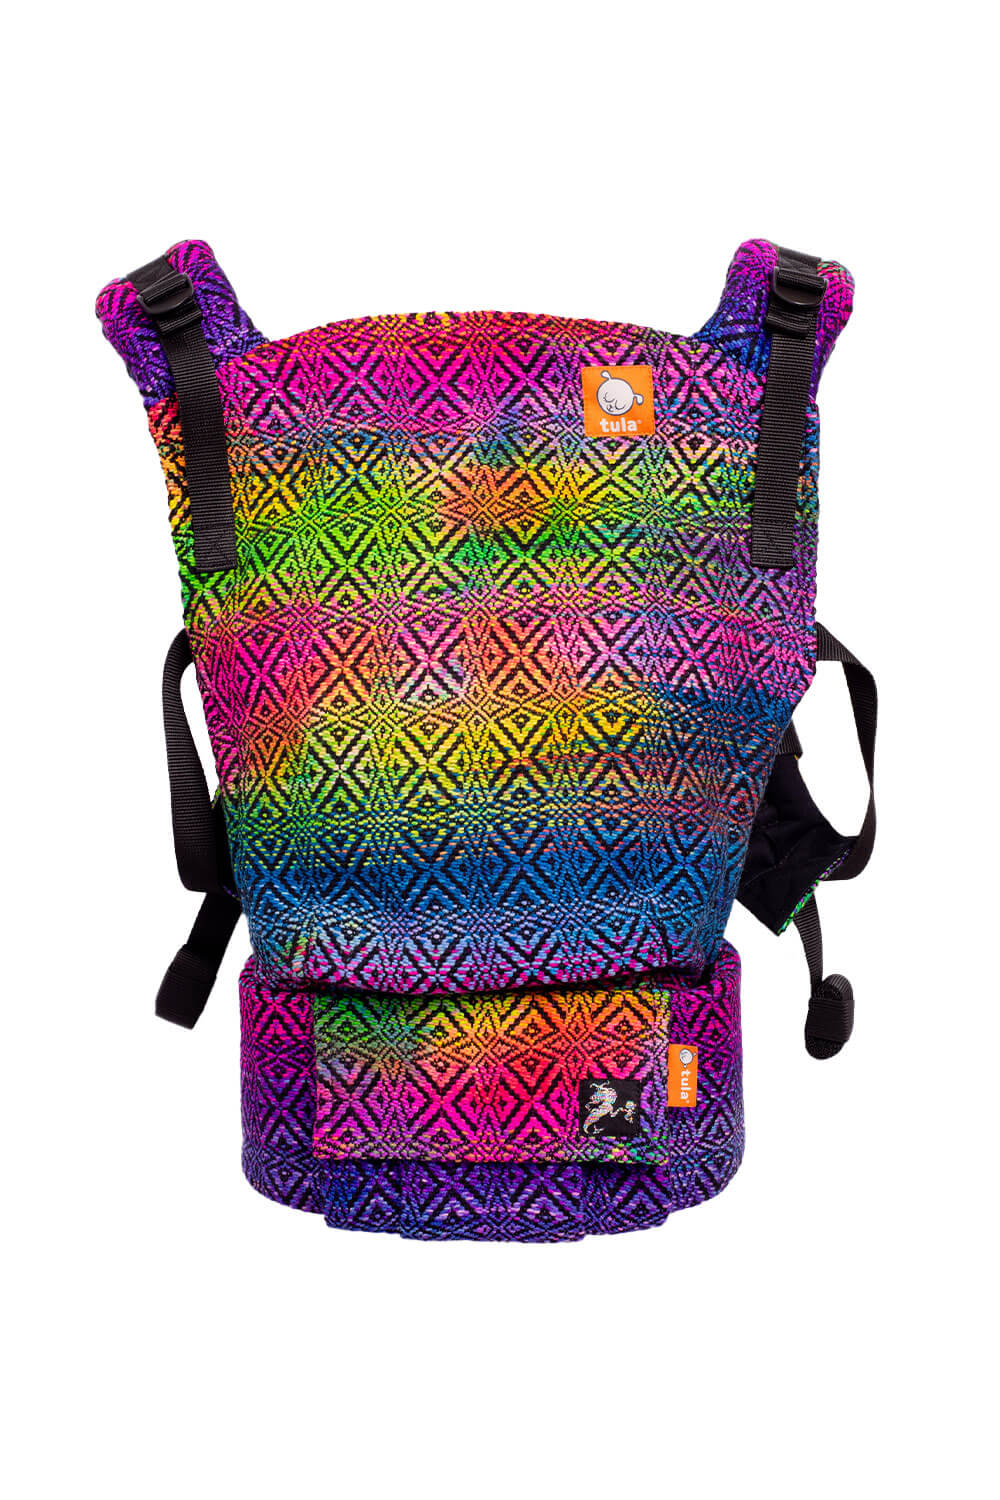 Galactic Mermaid - Signature Handwoven Free-to-Grow Baby Carrier